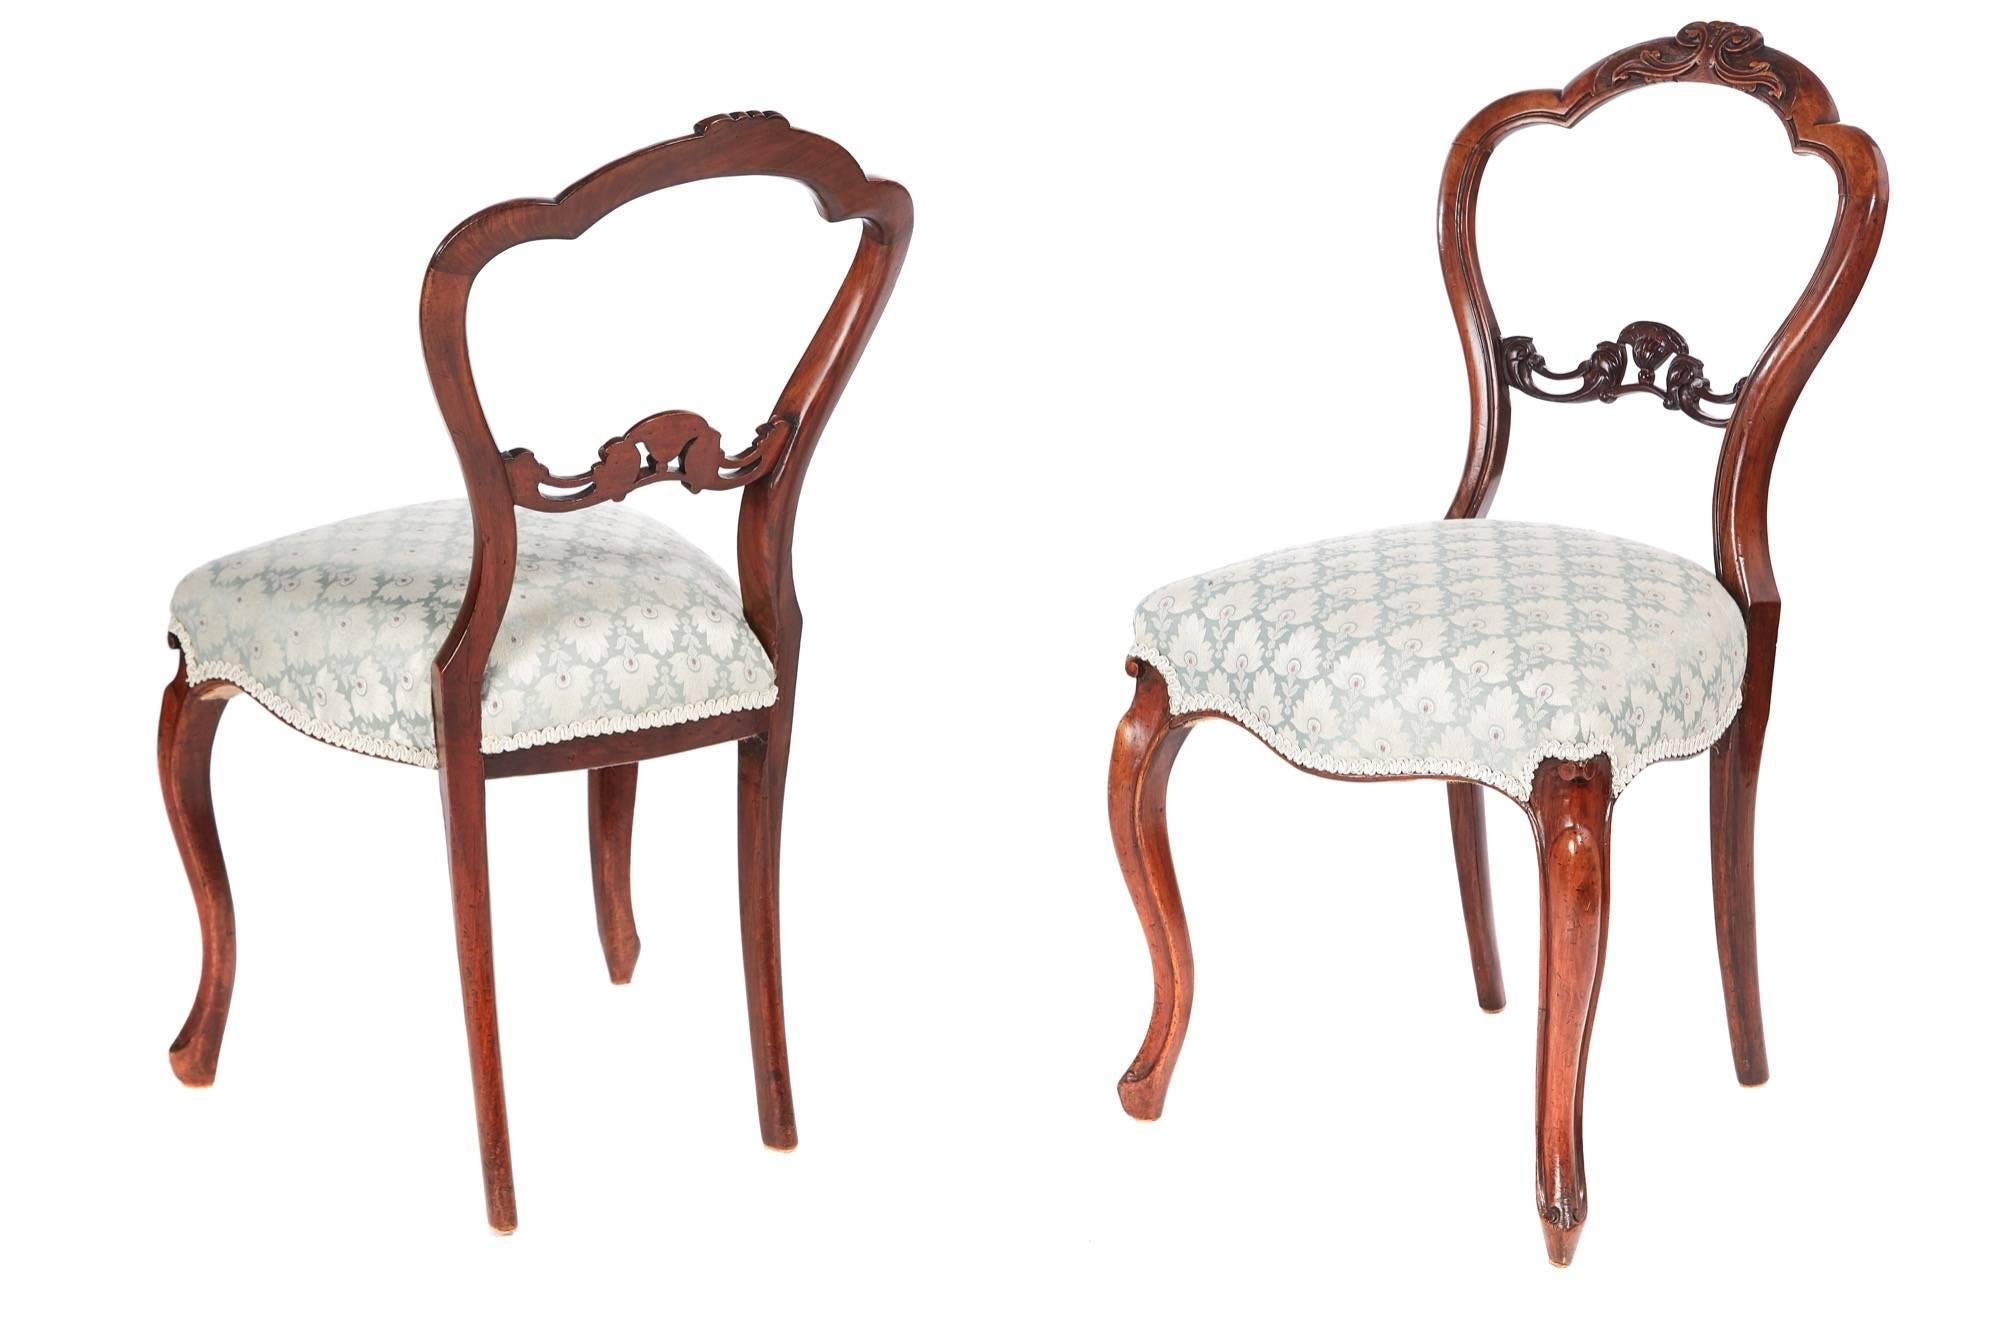 Quality set of six victorian carved walnut dining chairs, with a lovely carved shaped top rail, carved centre splat newly re-upholstered seats with a serpentine front rail, supported on elegant cabriole legs to the front outswept back legs.
Lovely